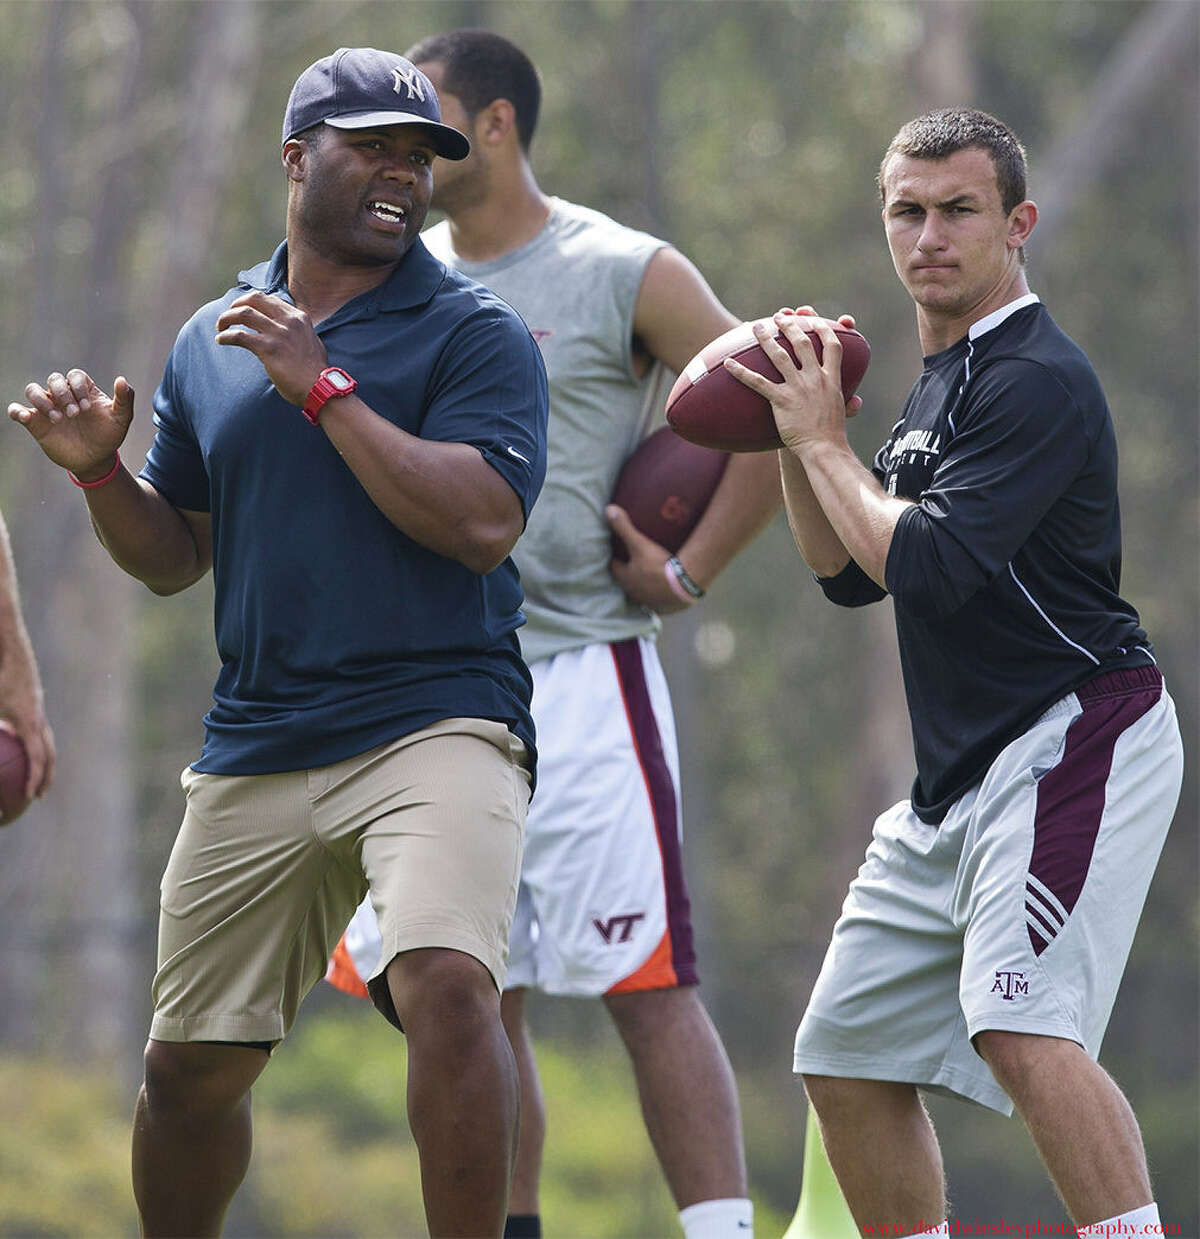 George Whitfield Jr. (left), who has worked with some of the top QBs around, trained Texas A&M's Johnny Manziel last summer.